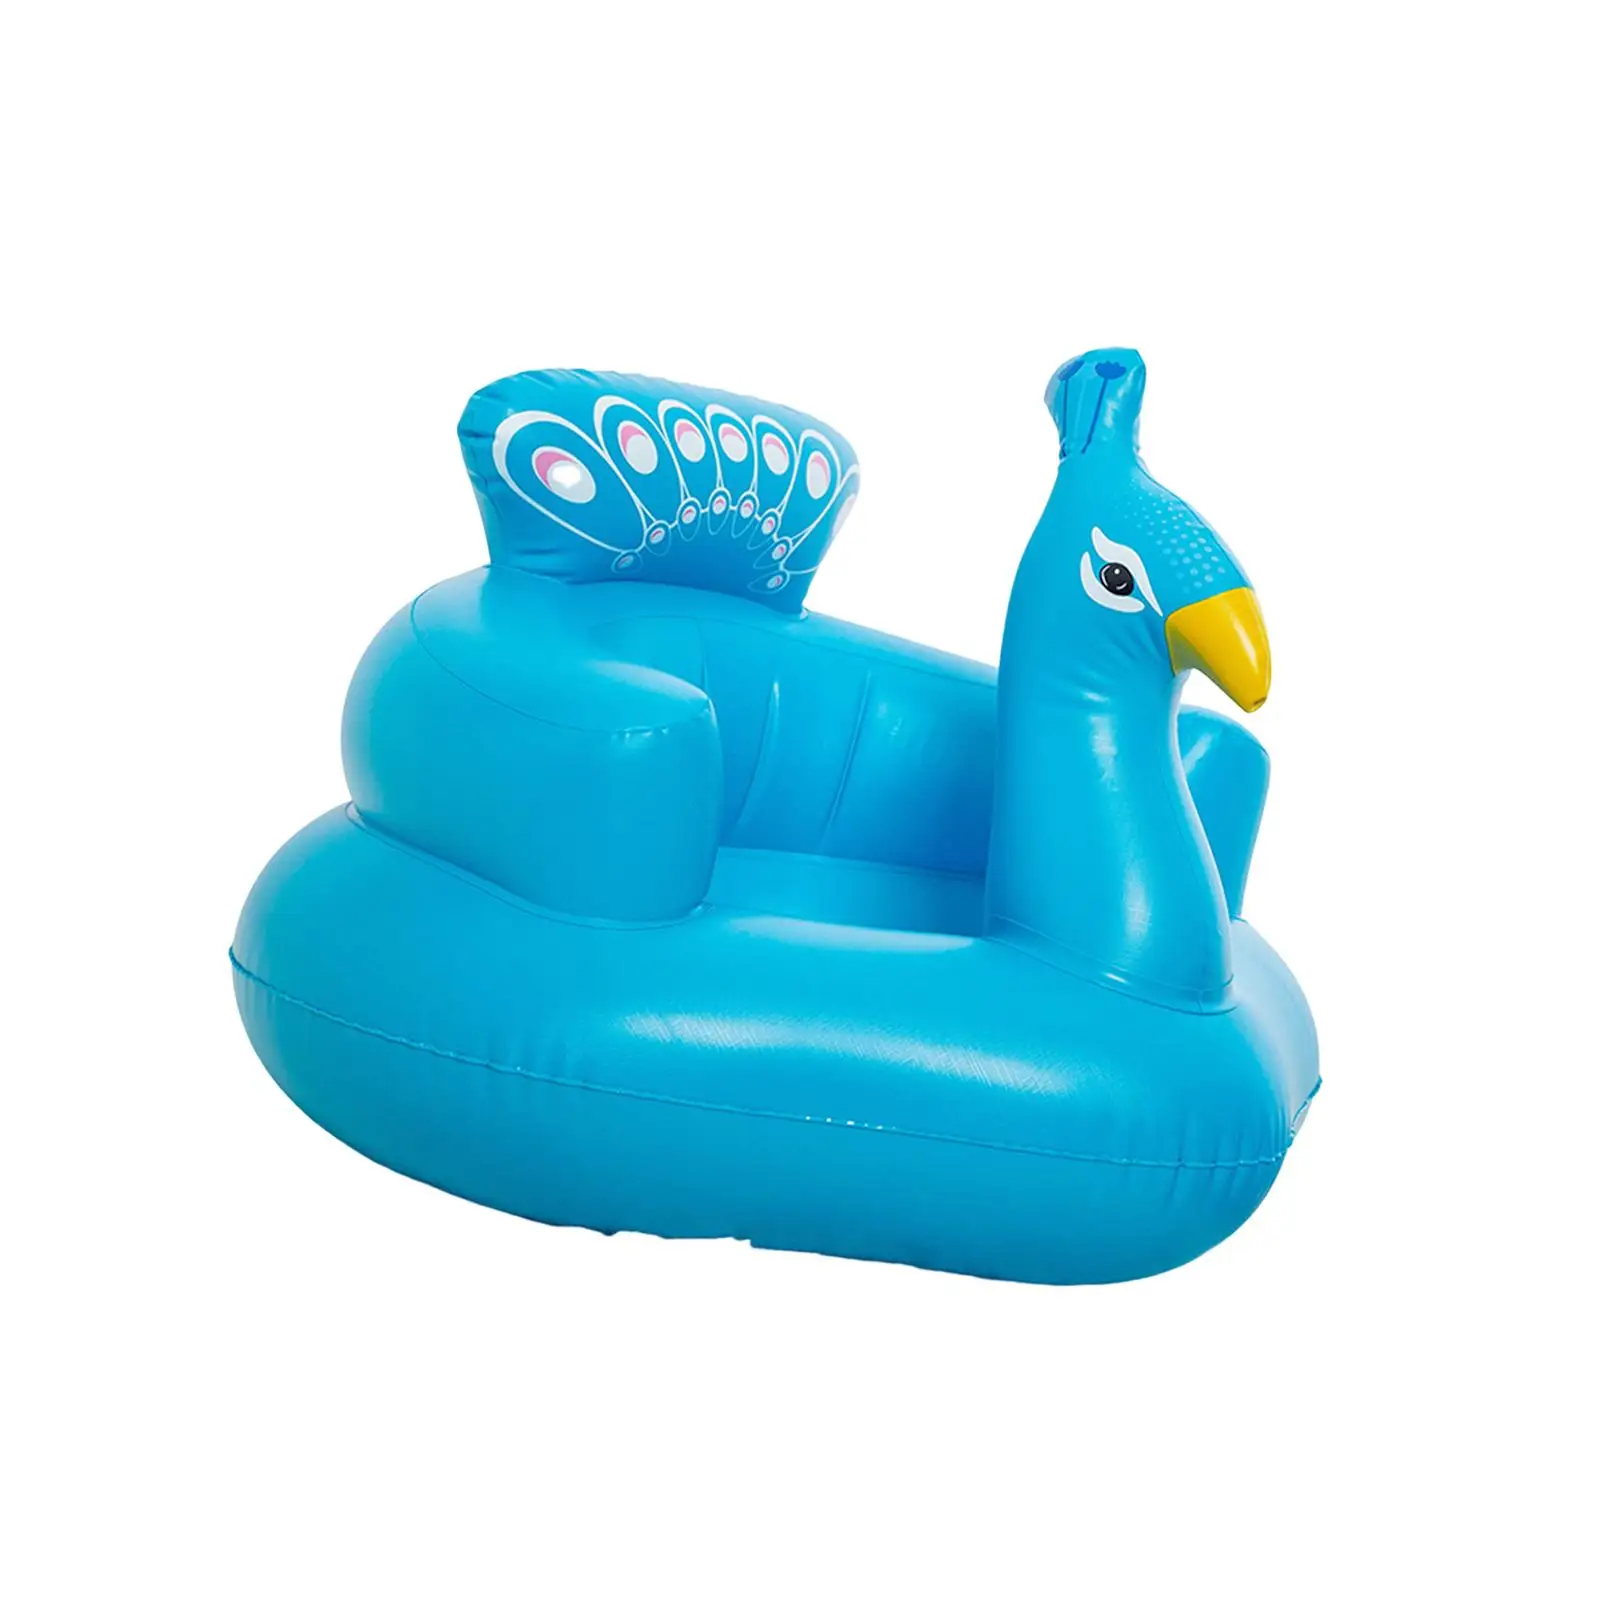 Baby Inflatable Seat Baby Shower Chair Floor Seater Playing Game Toy Toddler Chair for Sitting up Floor Seat Infant Floor Seats